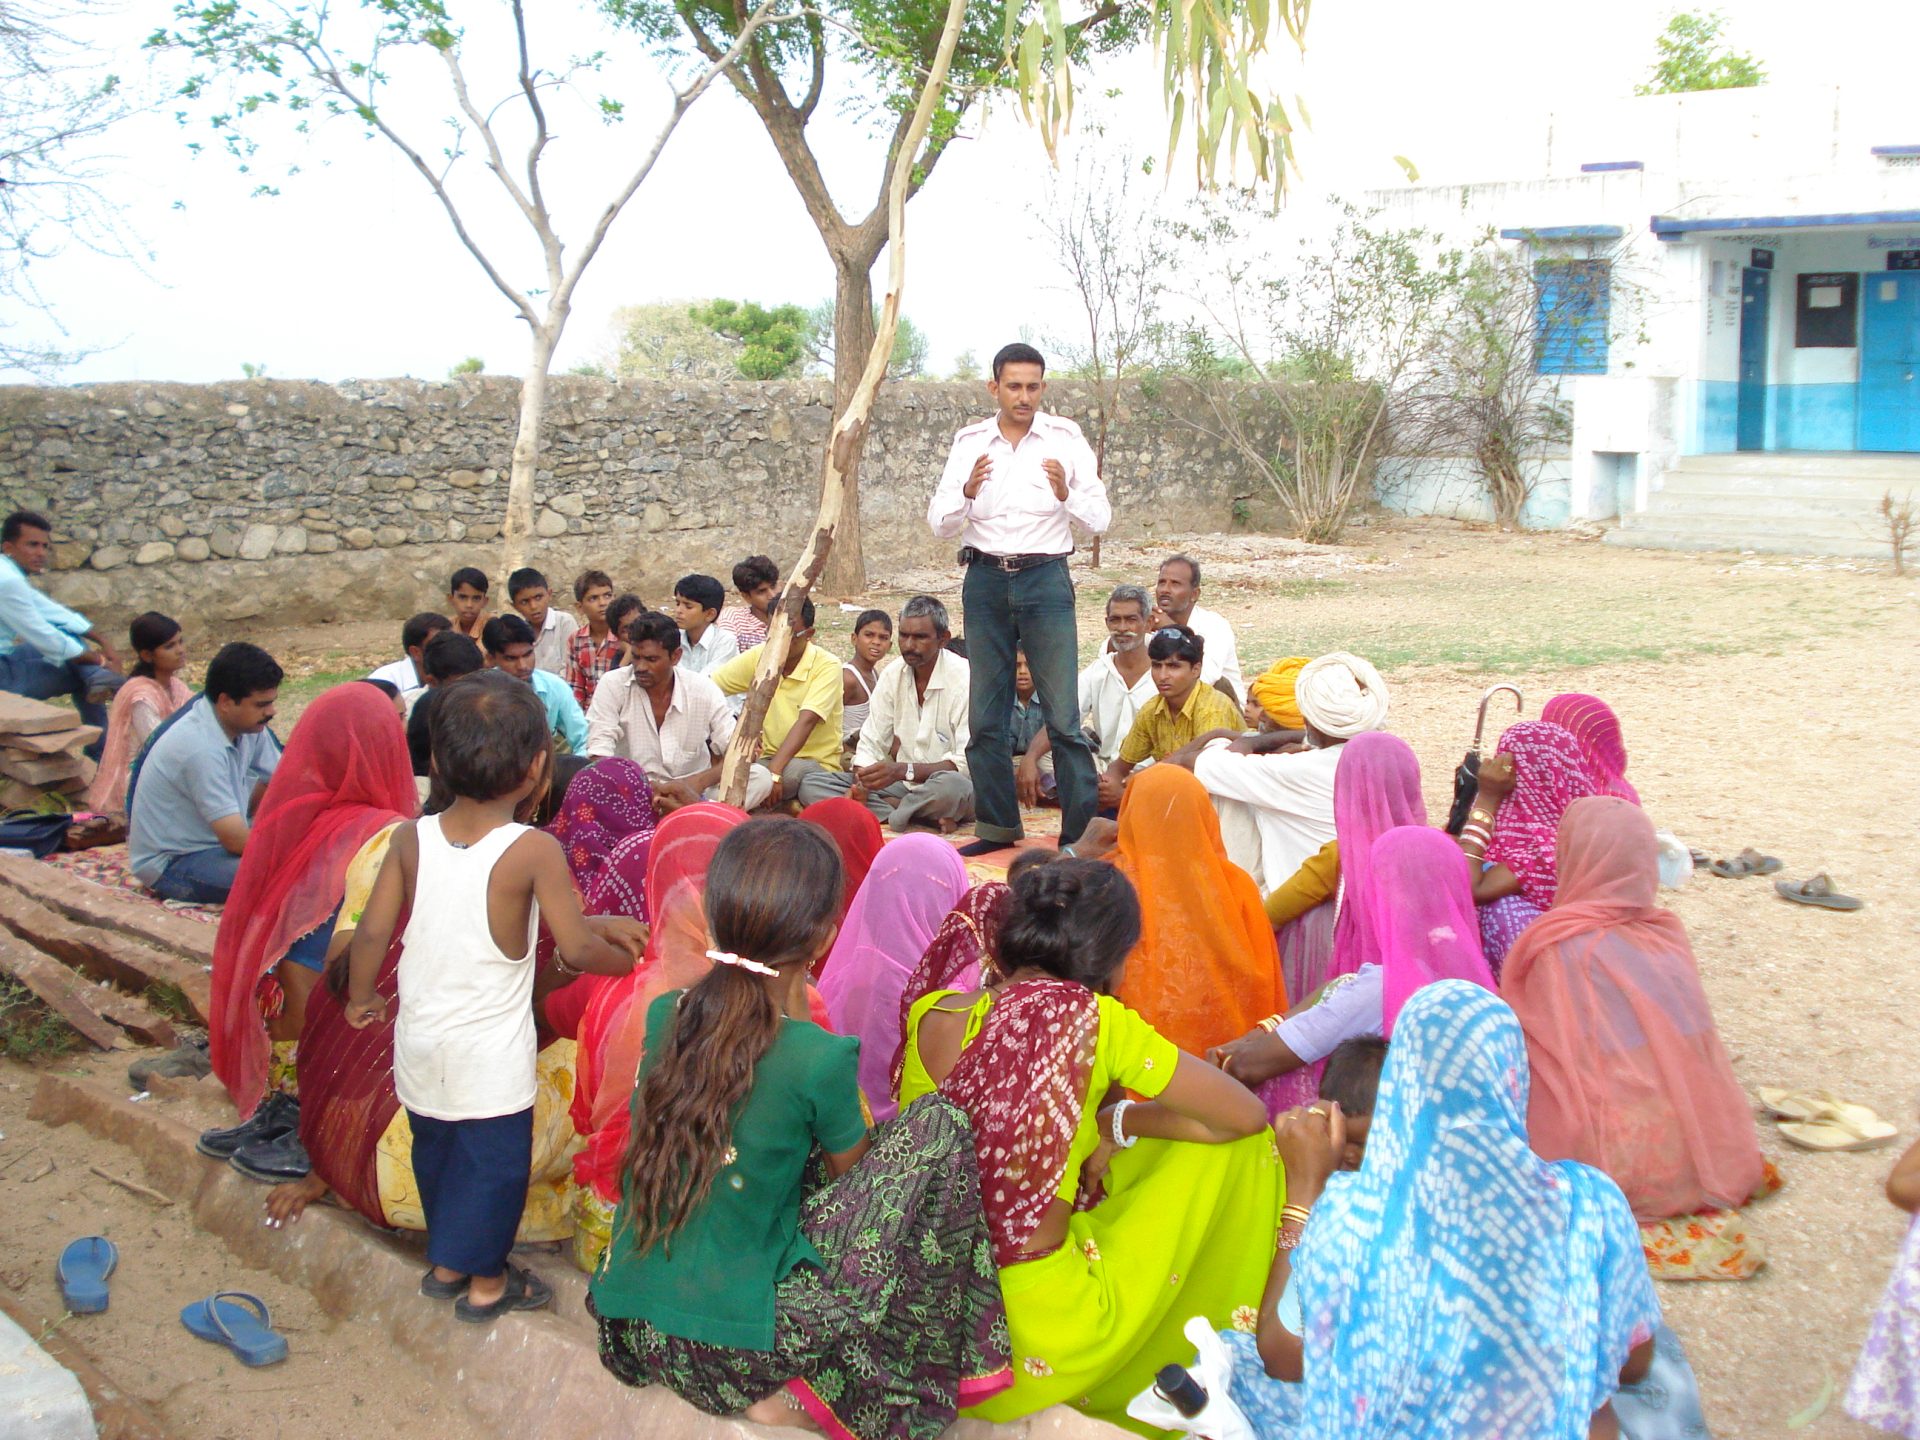 The Village Of lalpura: Community Mobilization In Action